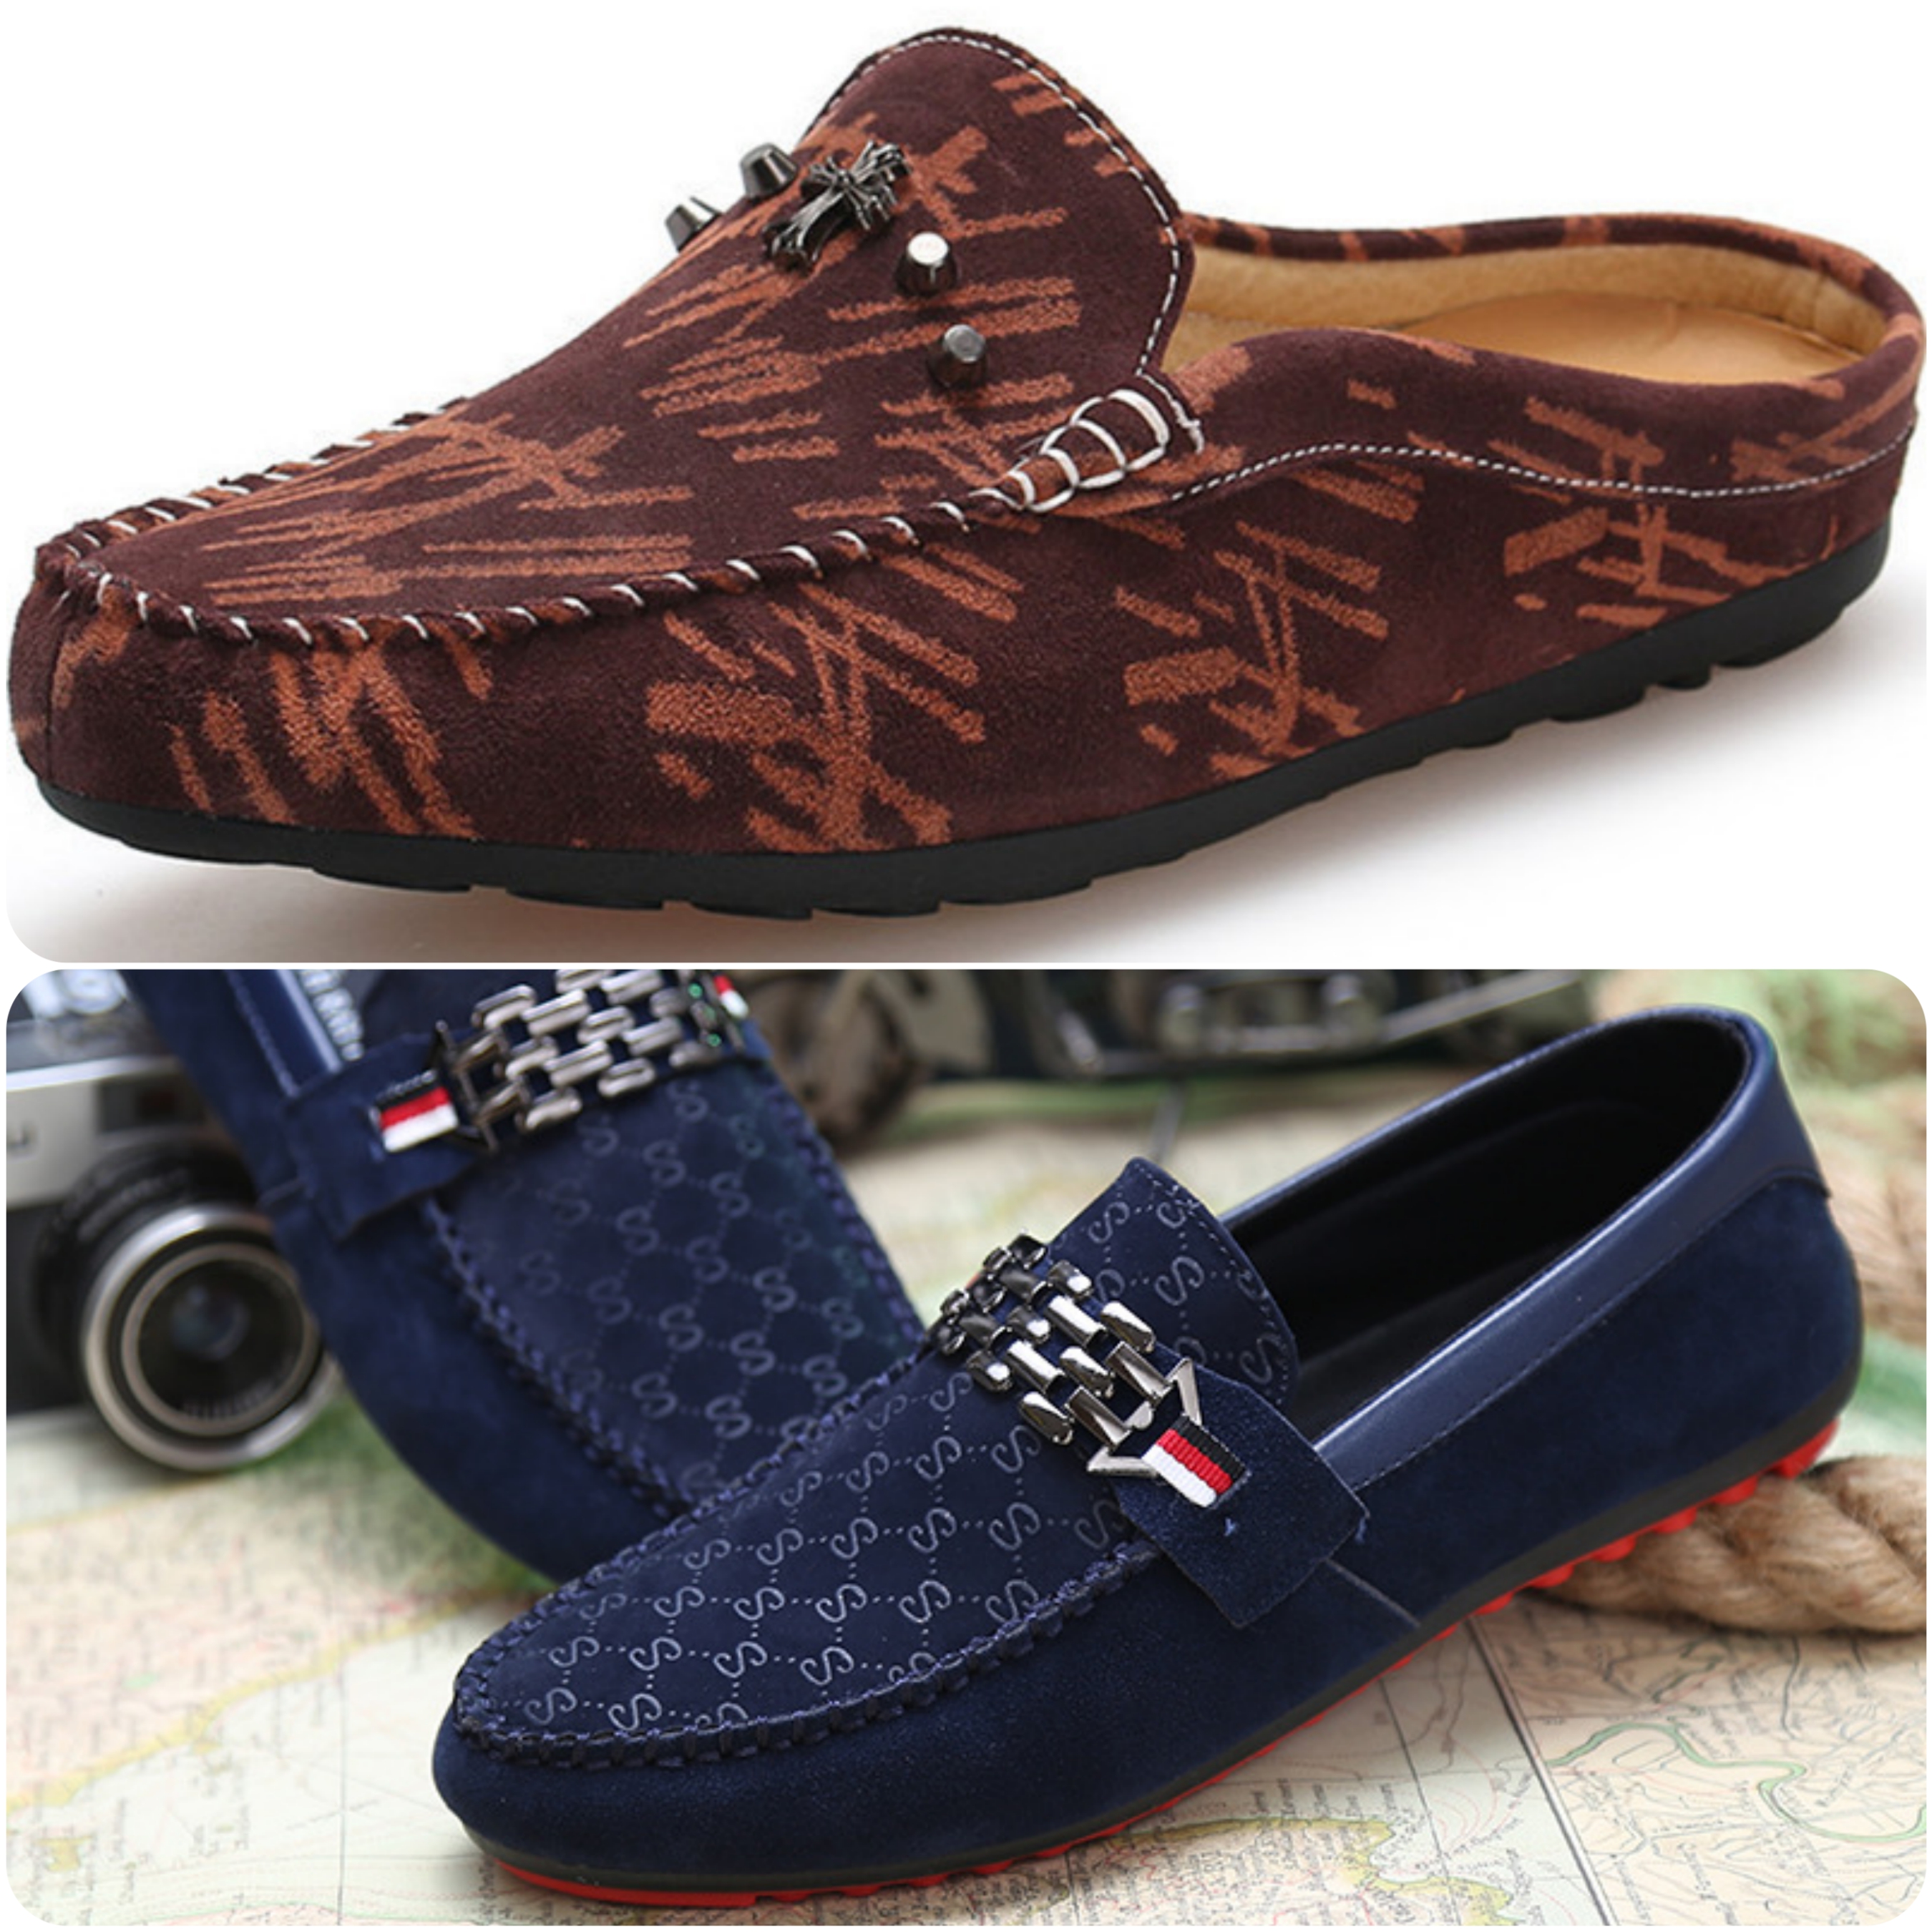 Latest Casual Shoes Designs for Men 2015-2016 | Stylo Planet